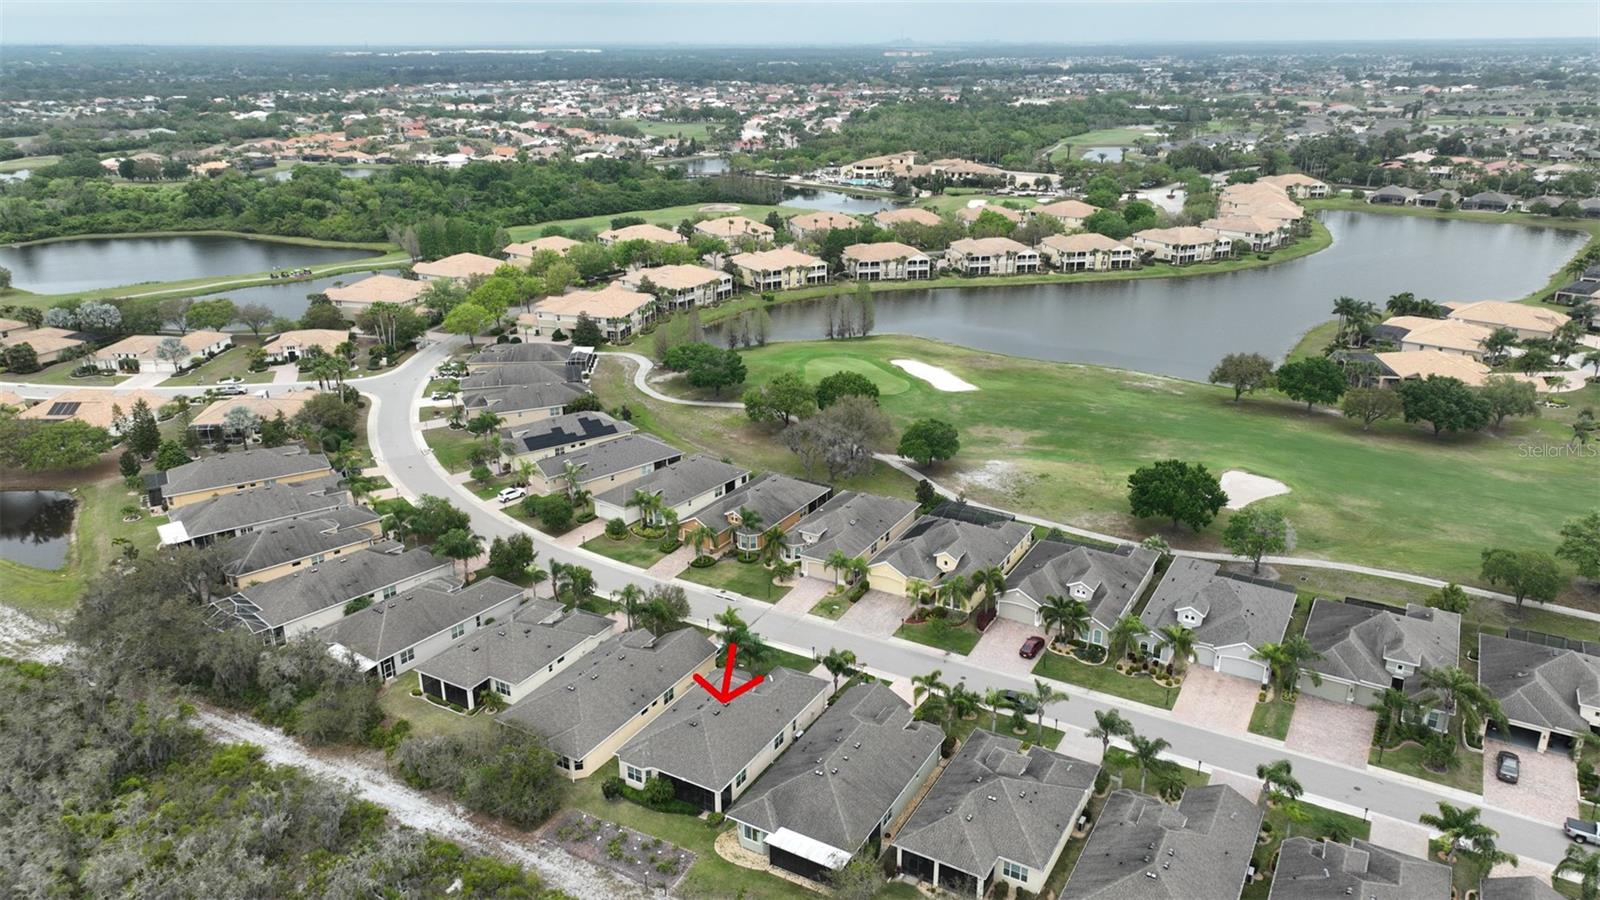 Ariel view of community, with home outlined in red arrow.